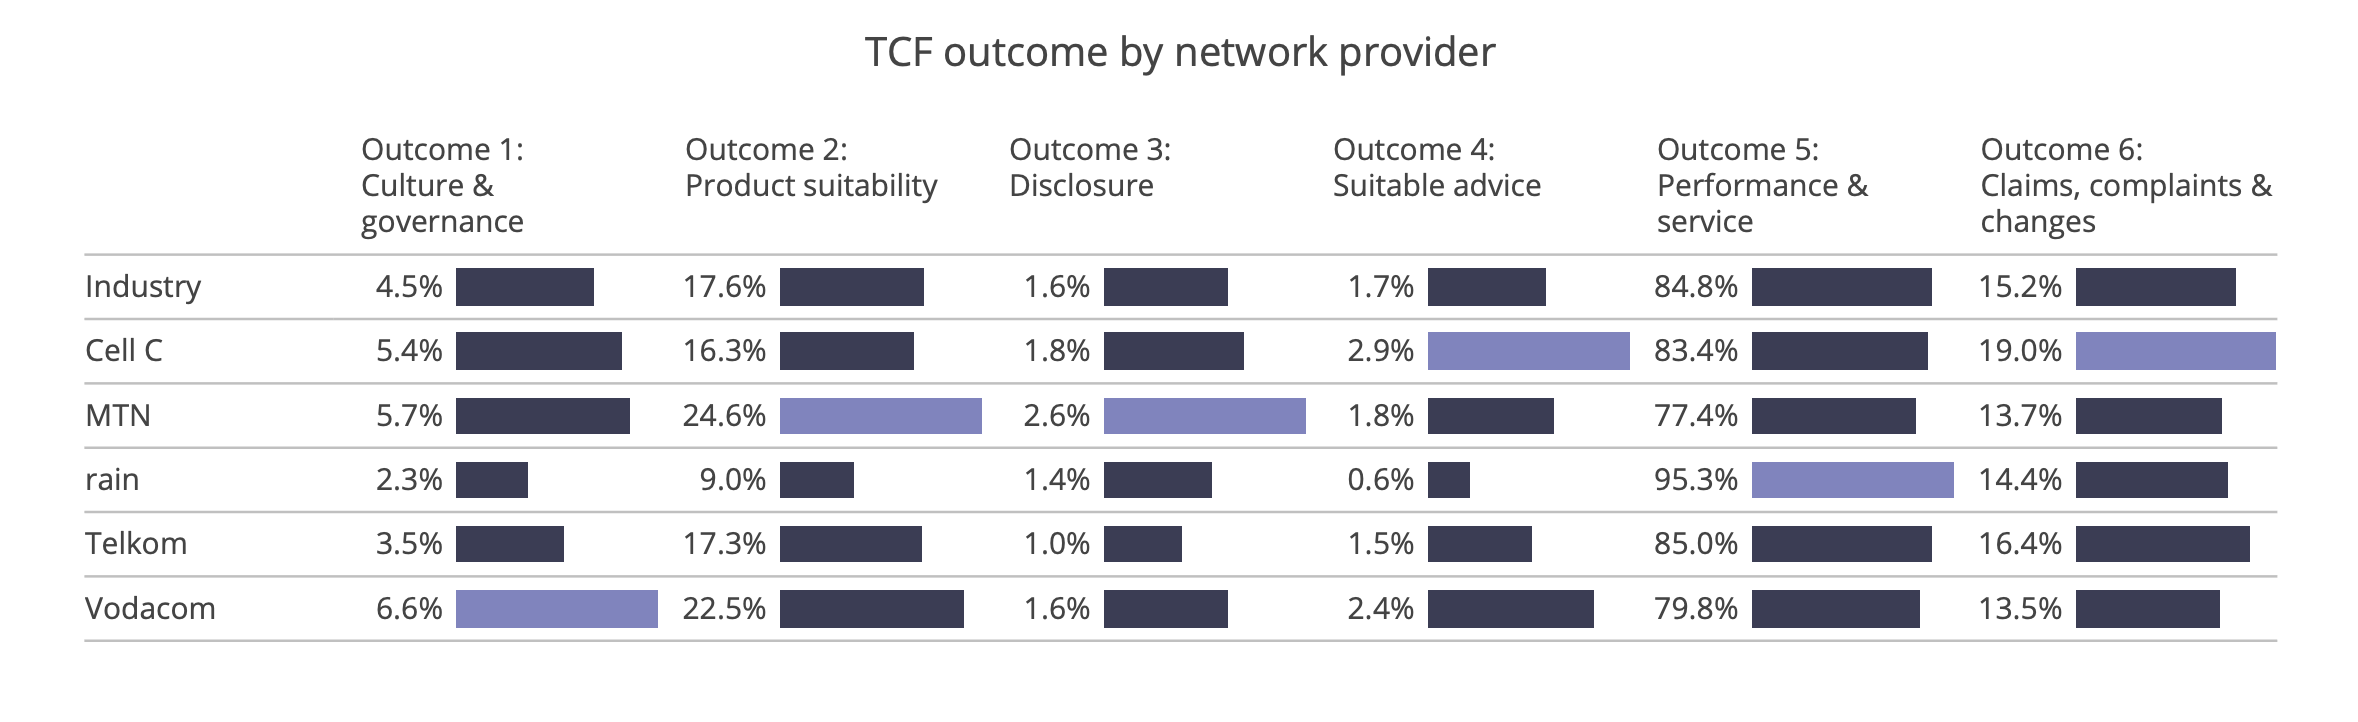 TCF outcomes by network provider